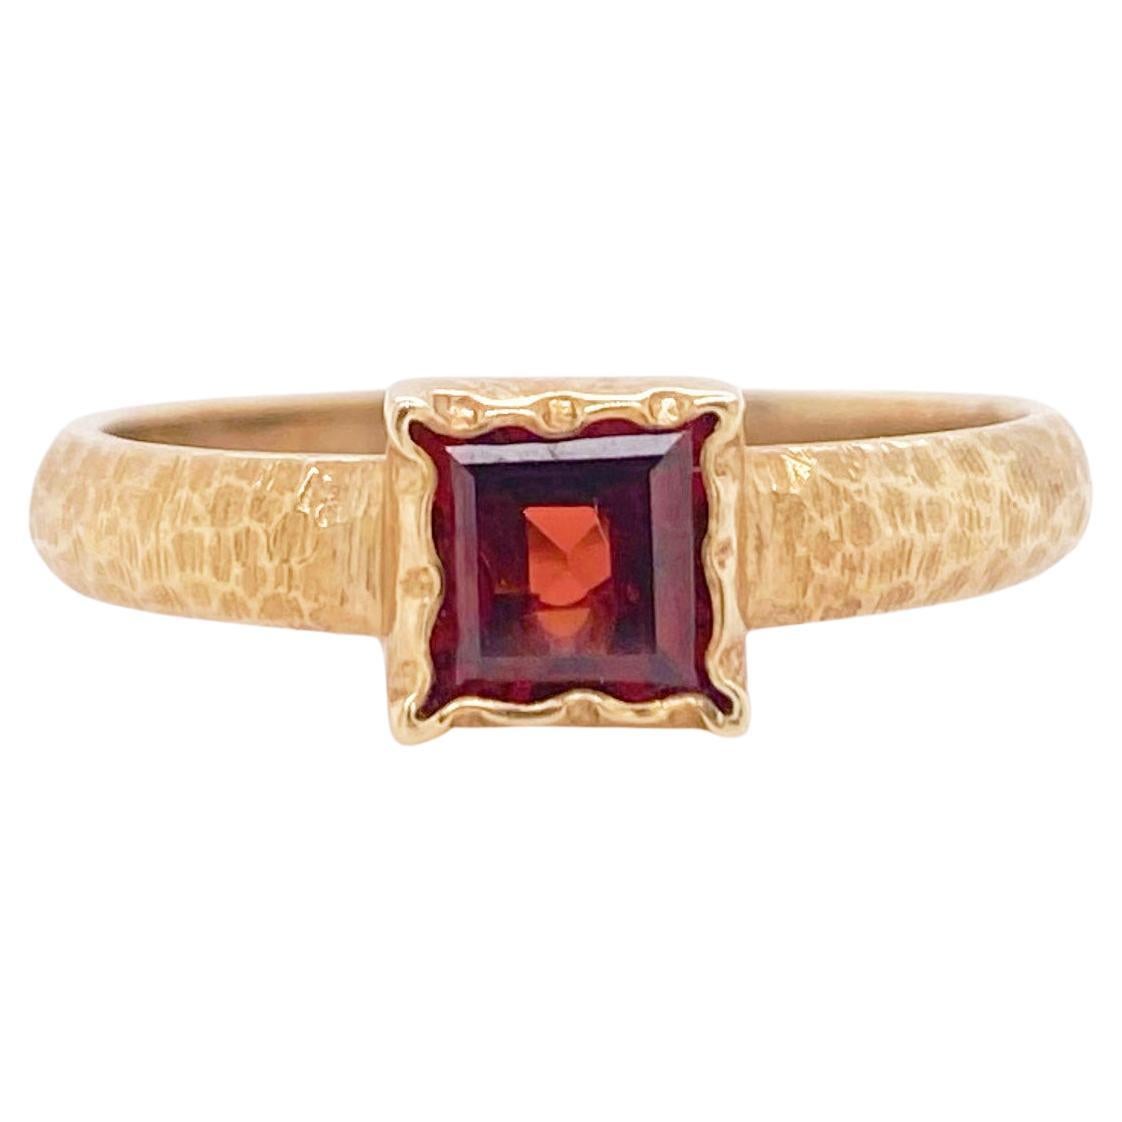 For Sale:  English Garnet Ring, Hammered Band with Satin Finish, 9K Yellow Gold, Square Cut